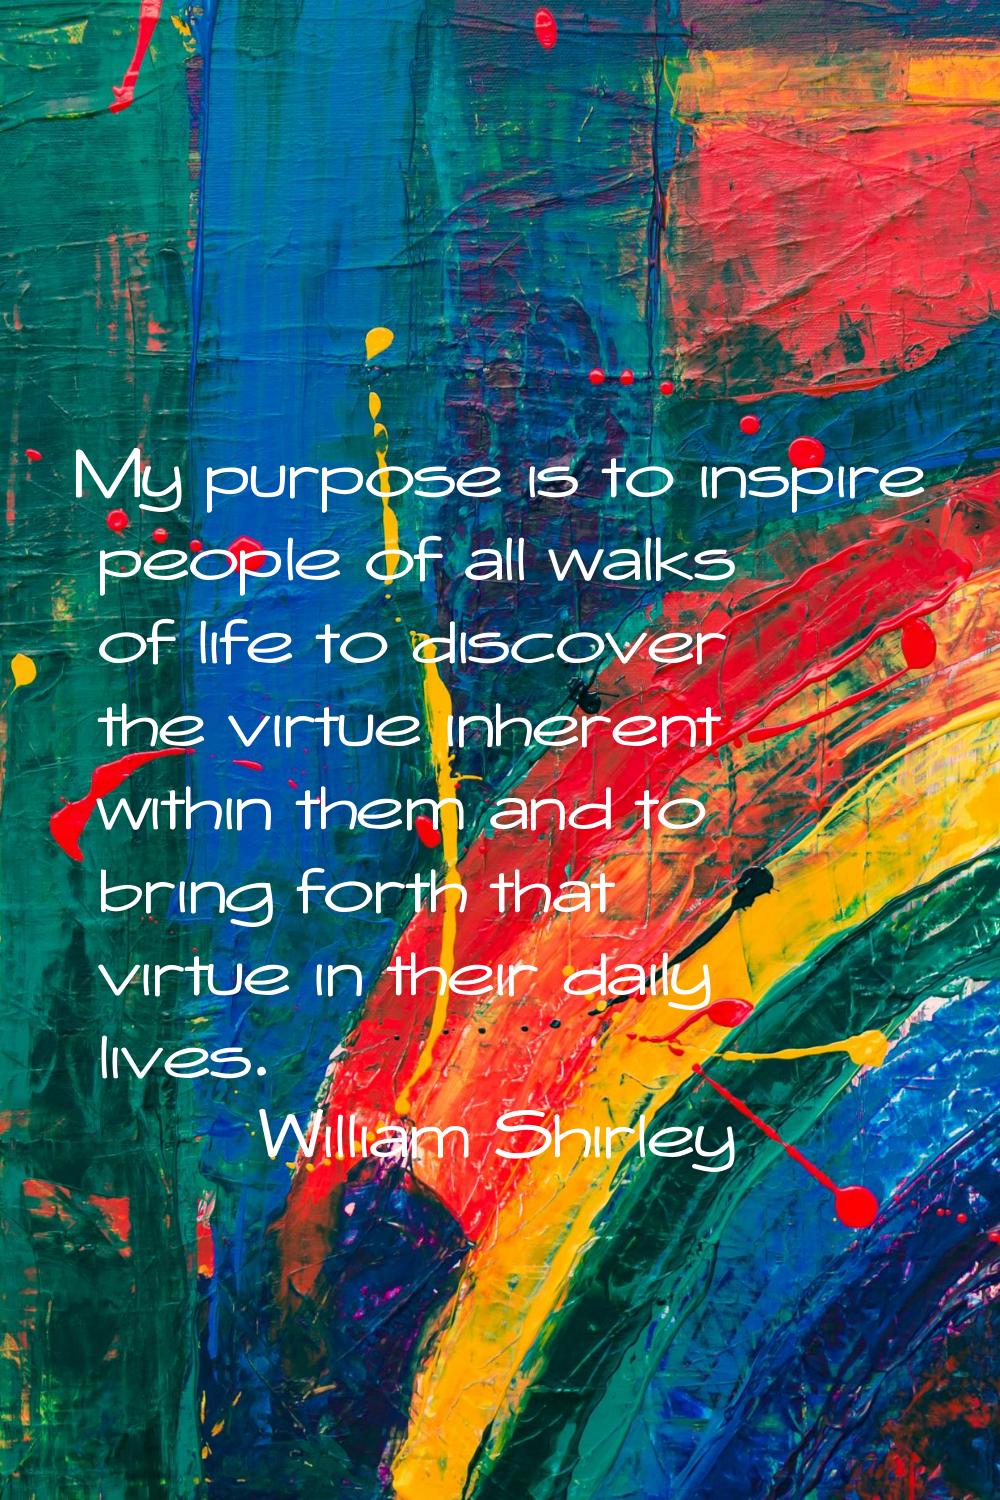 My purpose is to inspire people of all walks of life to discover the virtue inherent within them an